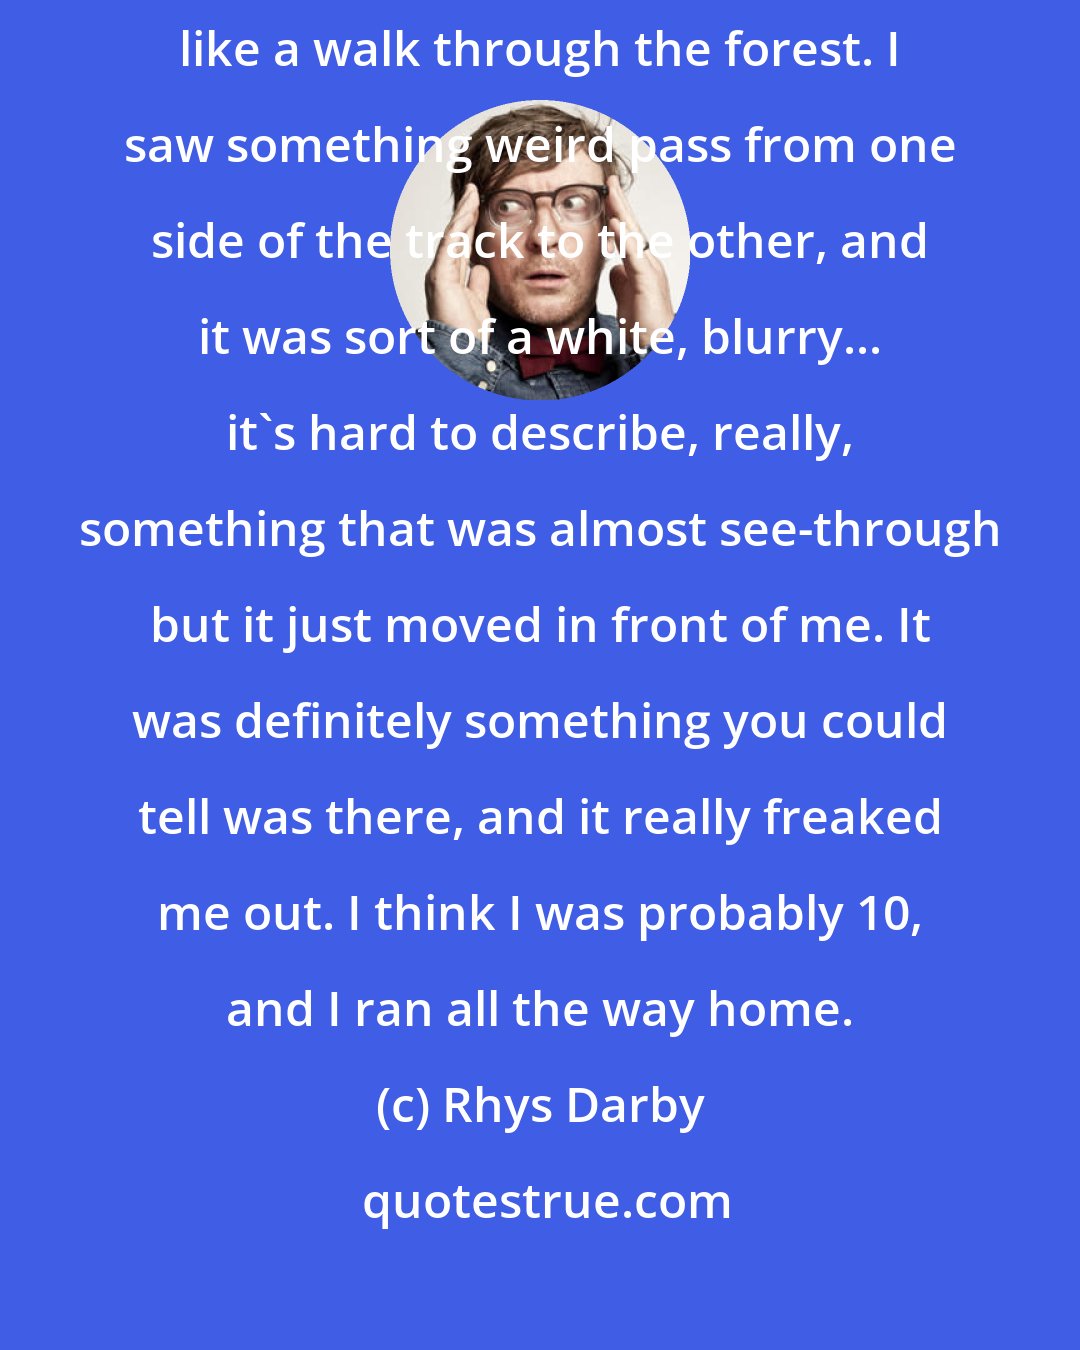 Rhys Darby: When I was a kid I thought I saw a ghost in the forest when I was on a bush walk, like a walk through the forest. I saw something weird pass from one side of the track to the other, and it was sort of a white, blurry... it's hard to describe, really, something that was almost see-through but it just moved in front of me. It was definitely something you could tell was there, and it really freaked me out. I think I was probably 10, and I ran all the way home.